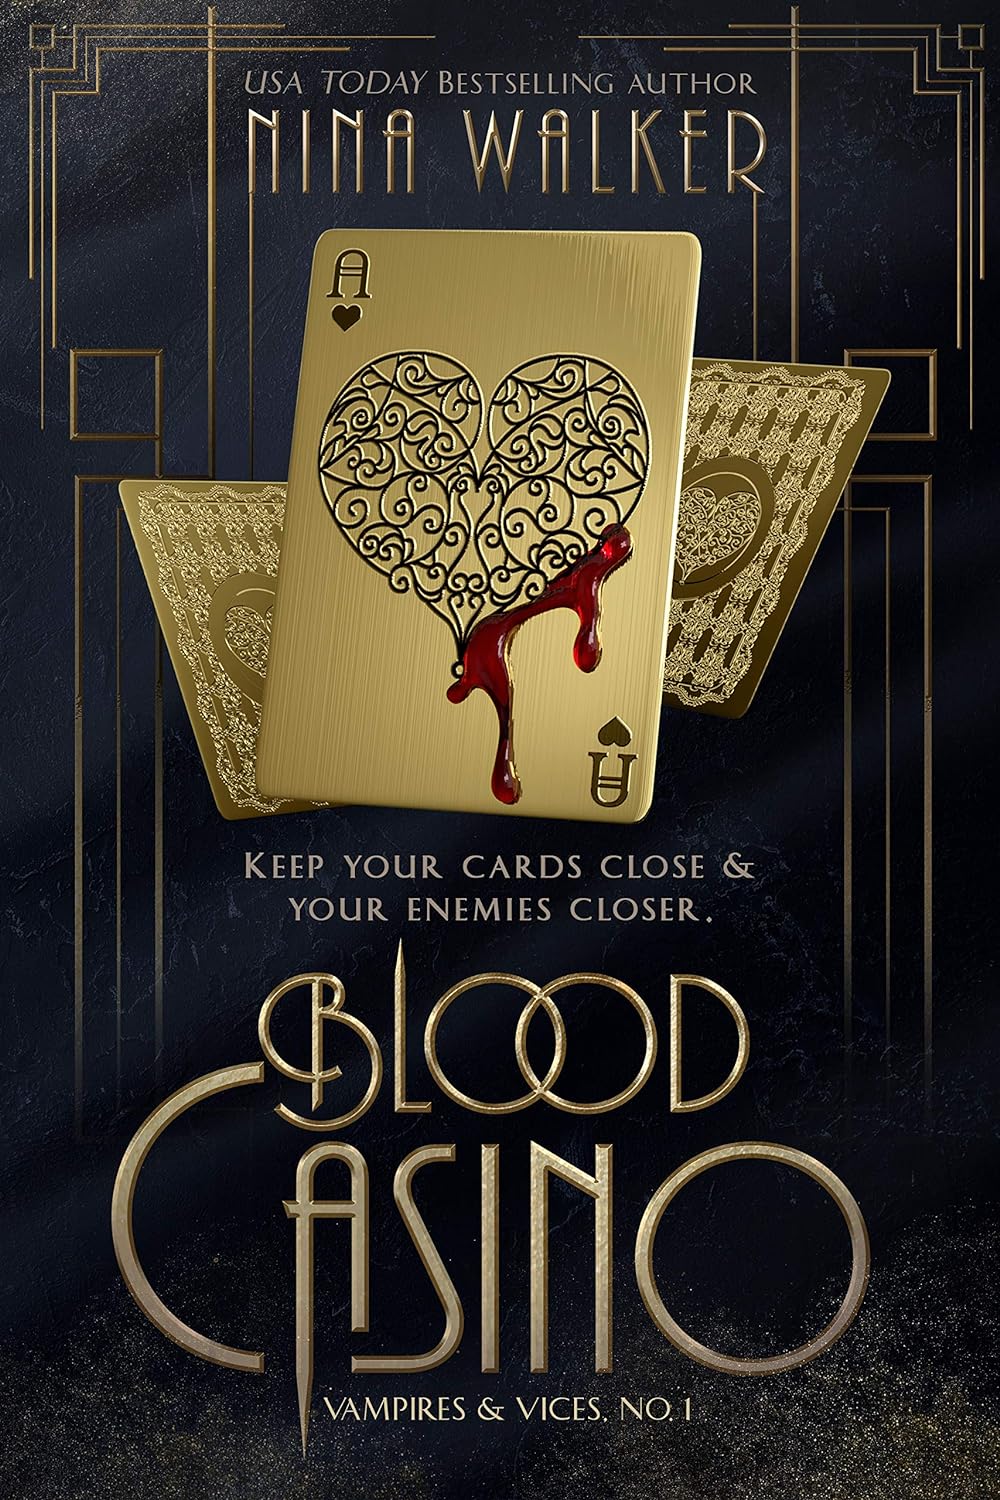 Blood Casino (Vampires & Vices Book 1) by…